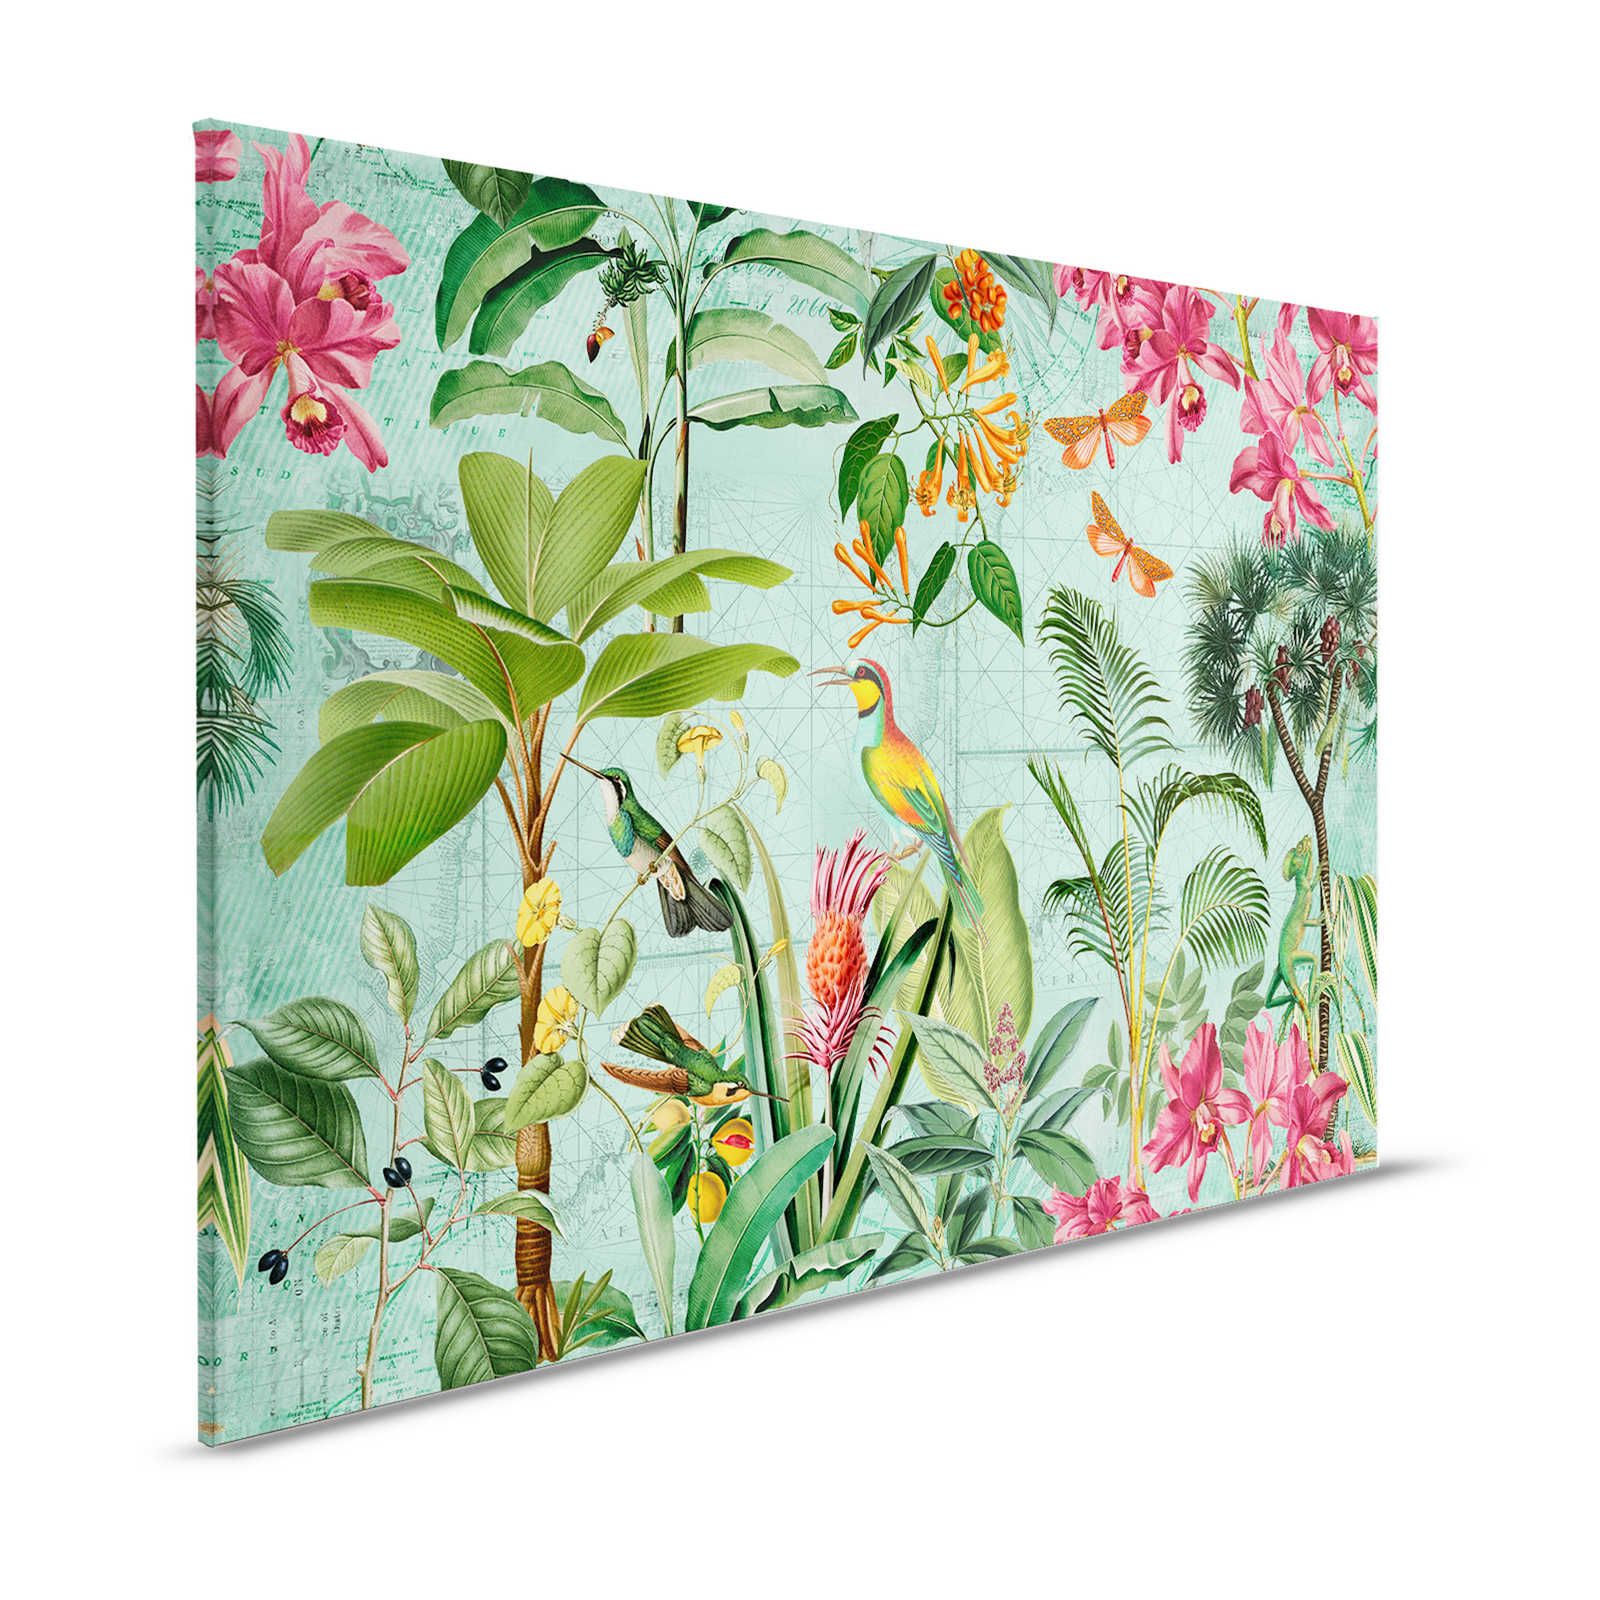 Colourful Jungle Canvas Painting with Trees, Flowers & Animals - 1.20 m x 0.80 m
